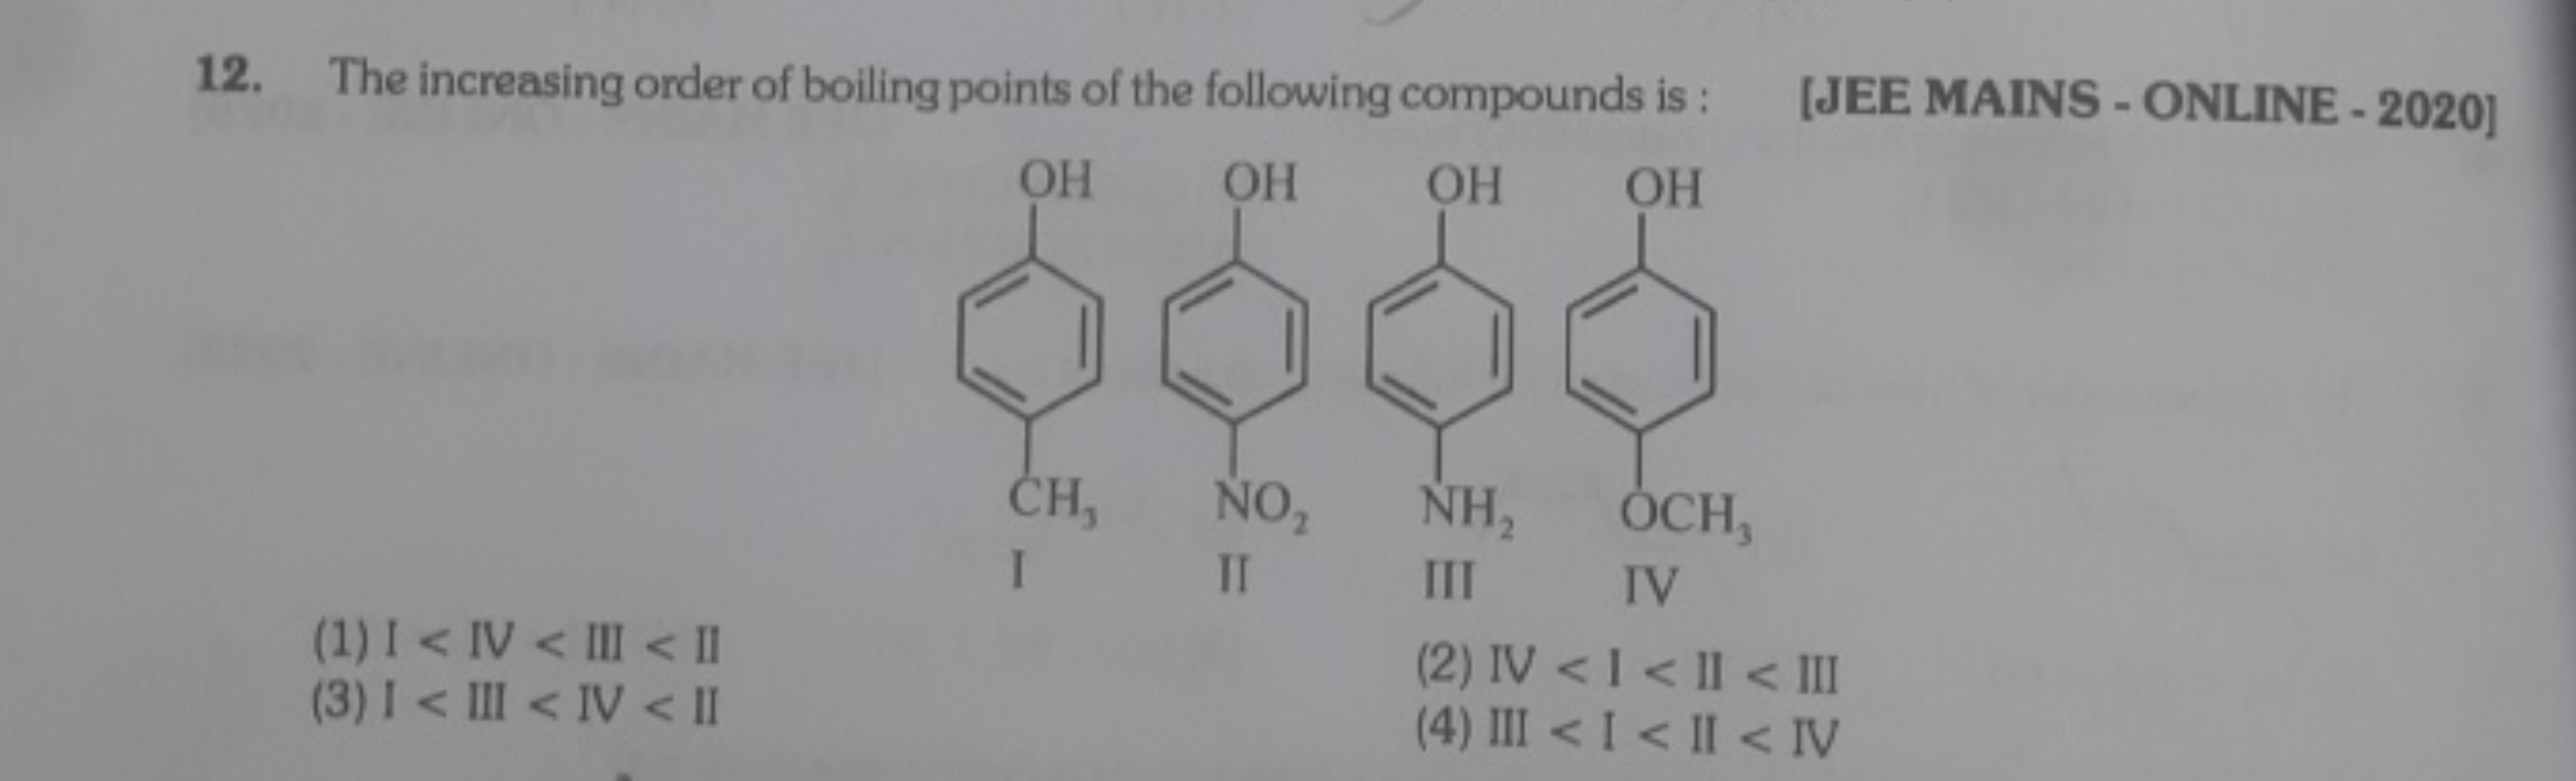 The increasing order of boiling points of the following compounds is :